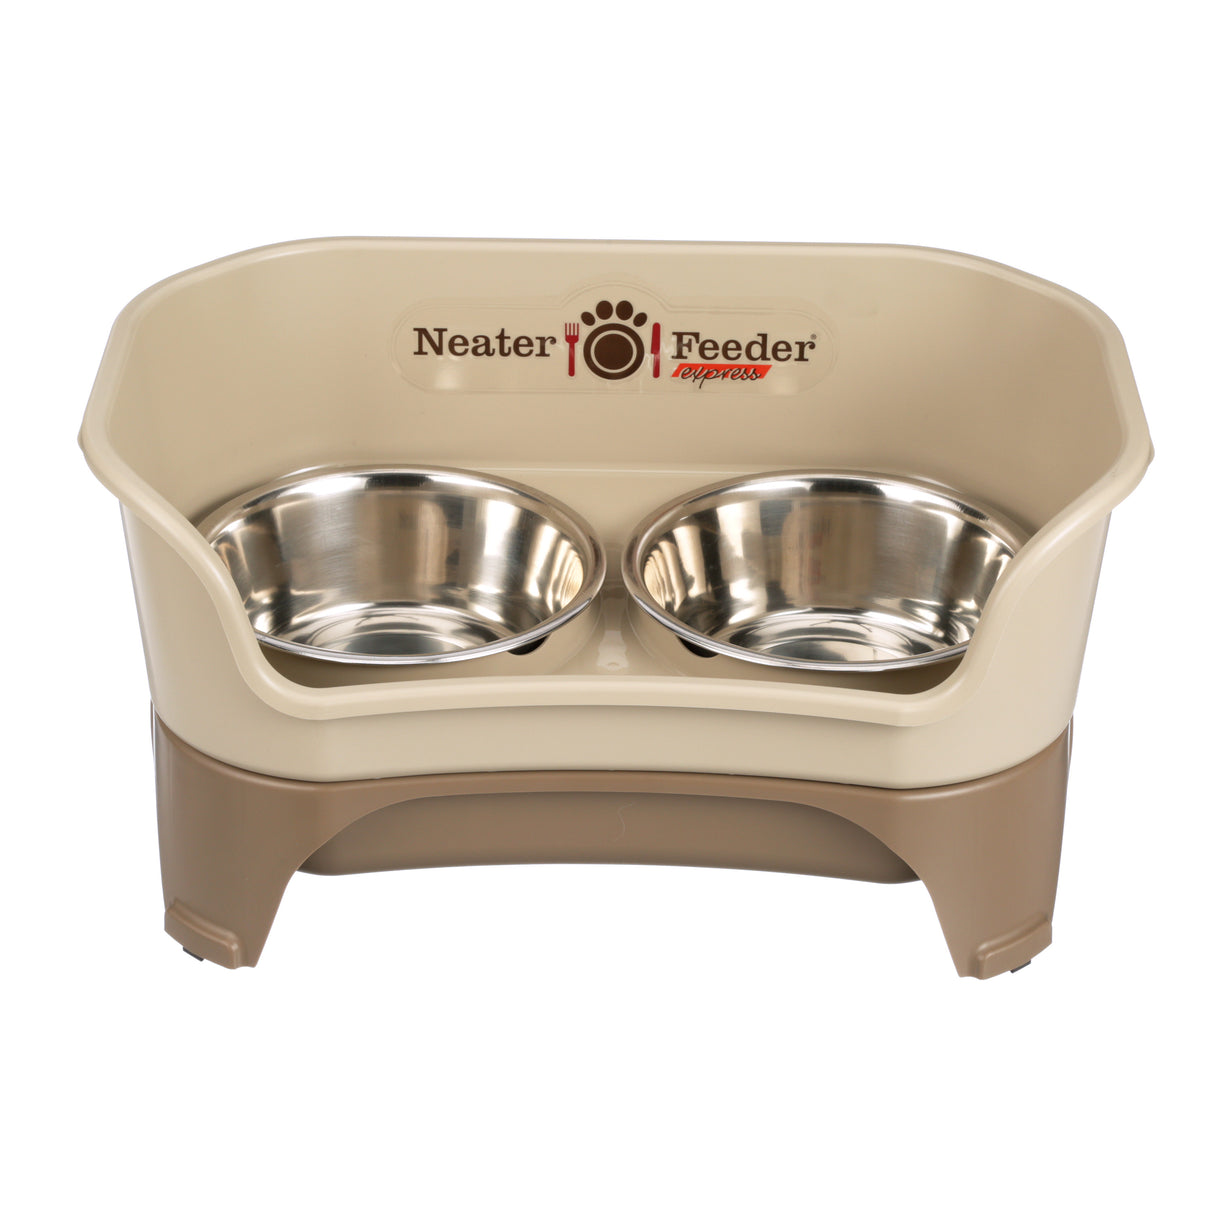 Cappuccino Express Neater Feeder medium to large feeding system